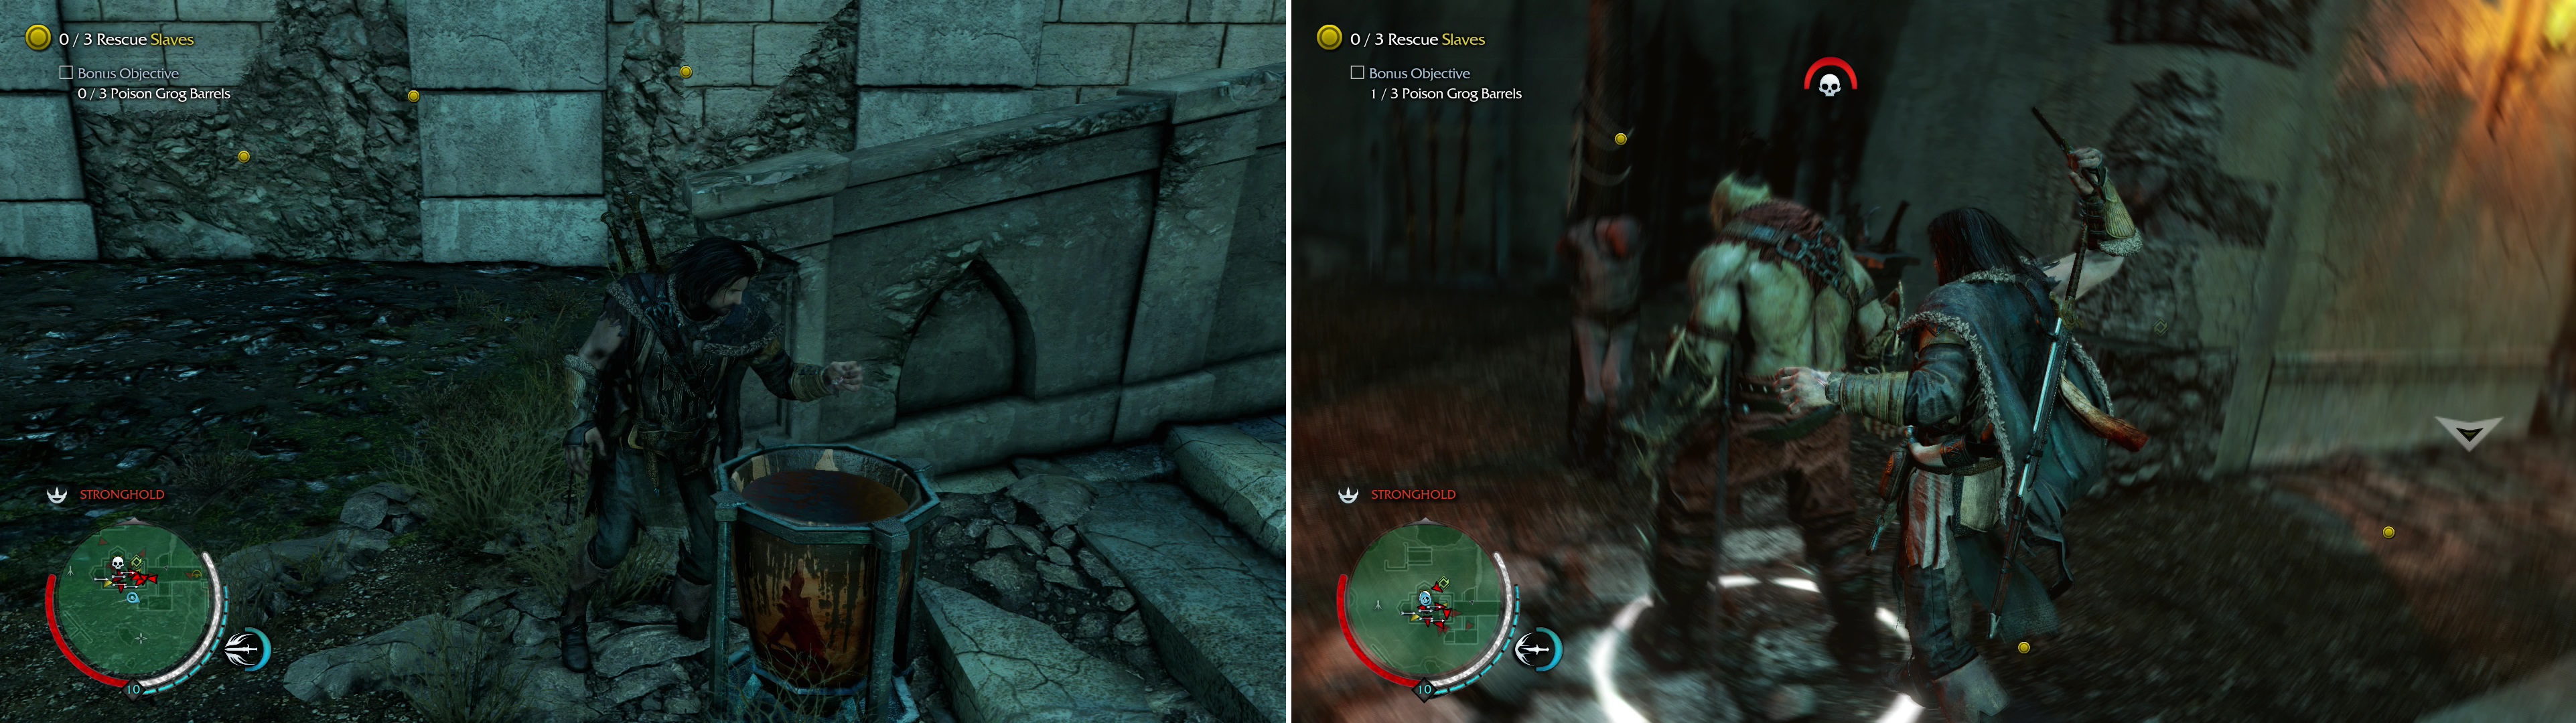 Poison Grog Barrels to satisfy the bonus objectives for this mission-Uruks don’t need to actually drink from them (left)-then free the Slaves, especially ones being taunted by Uruks (right).